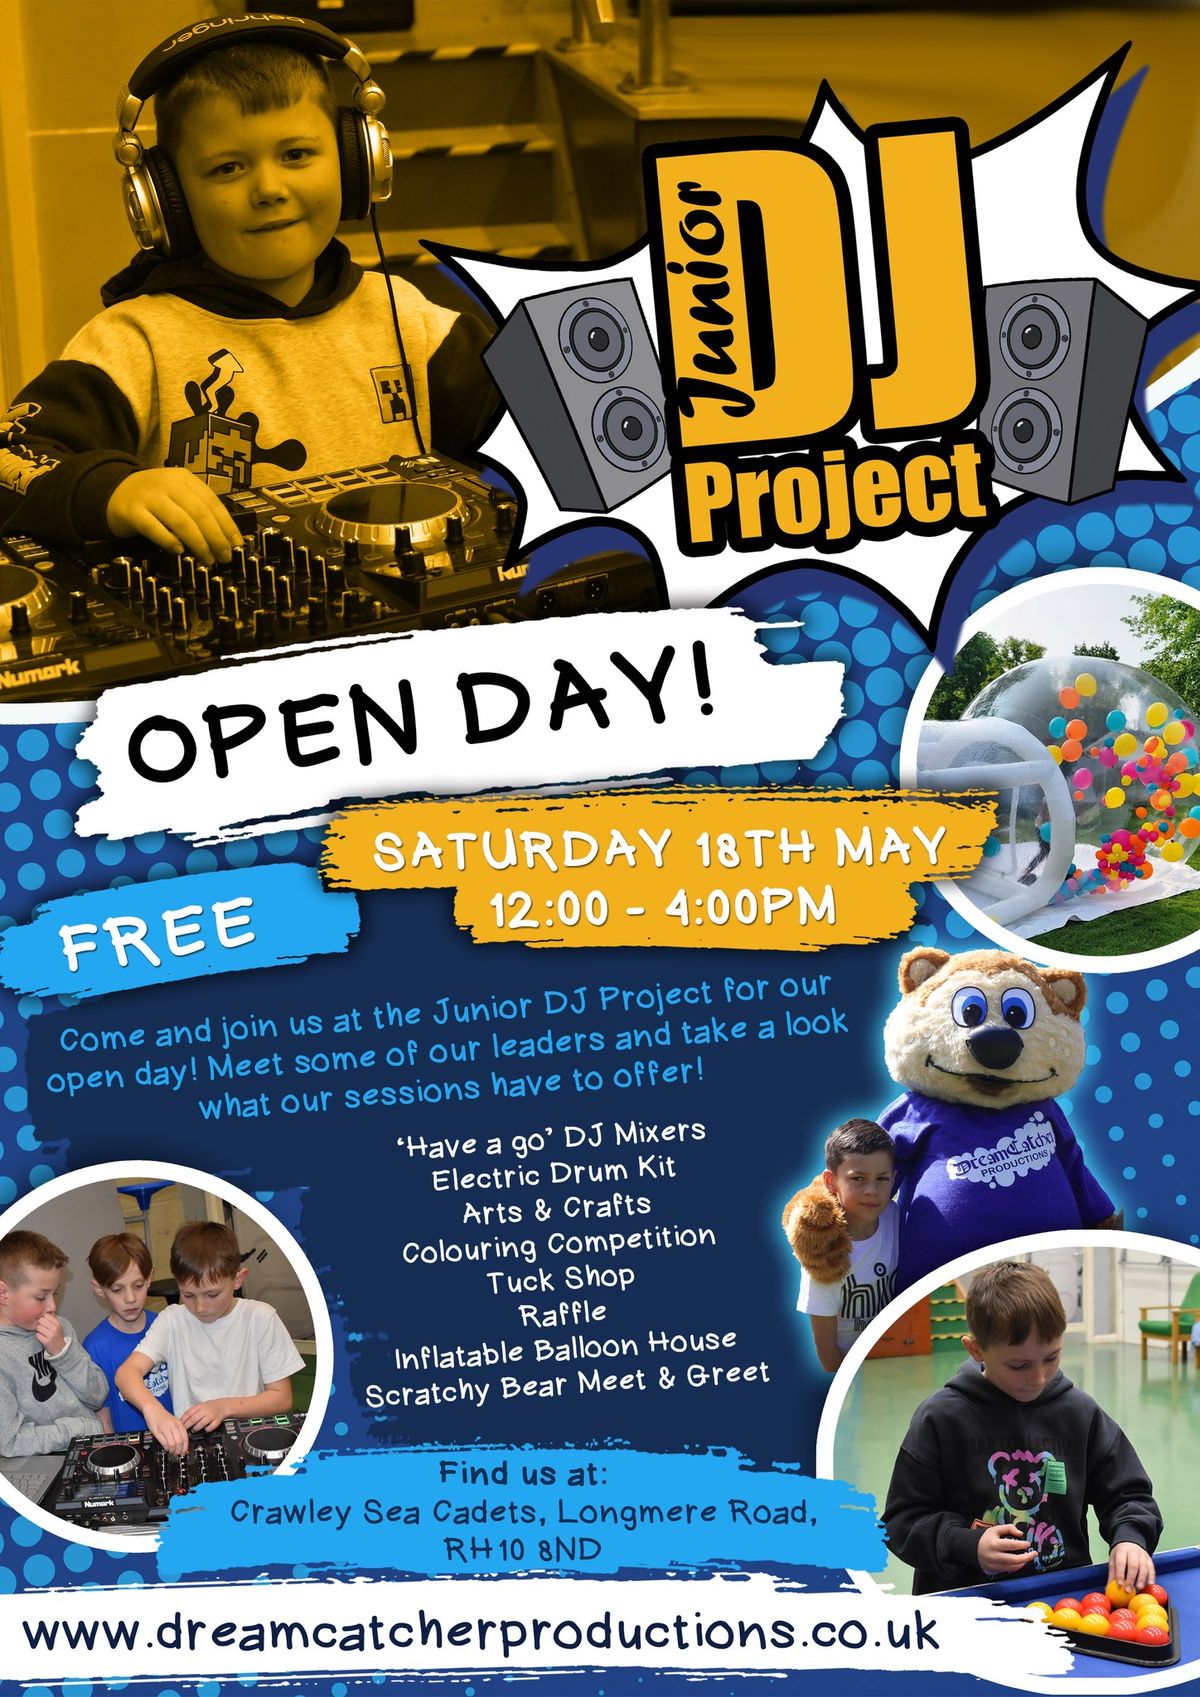 Junior DJ Project - FREE OPEN DAY!